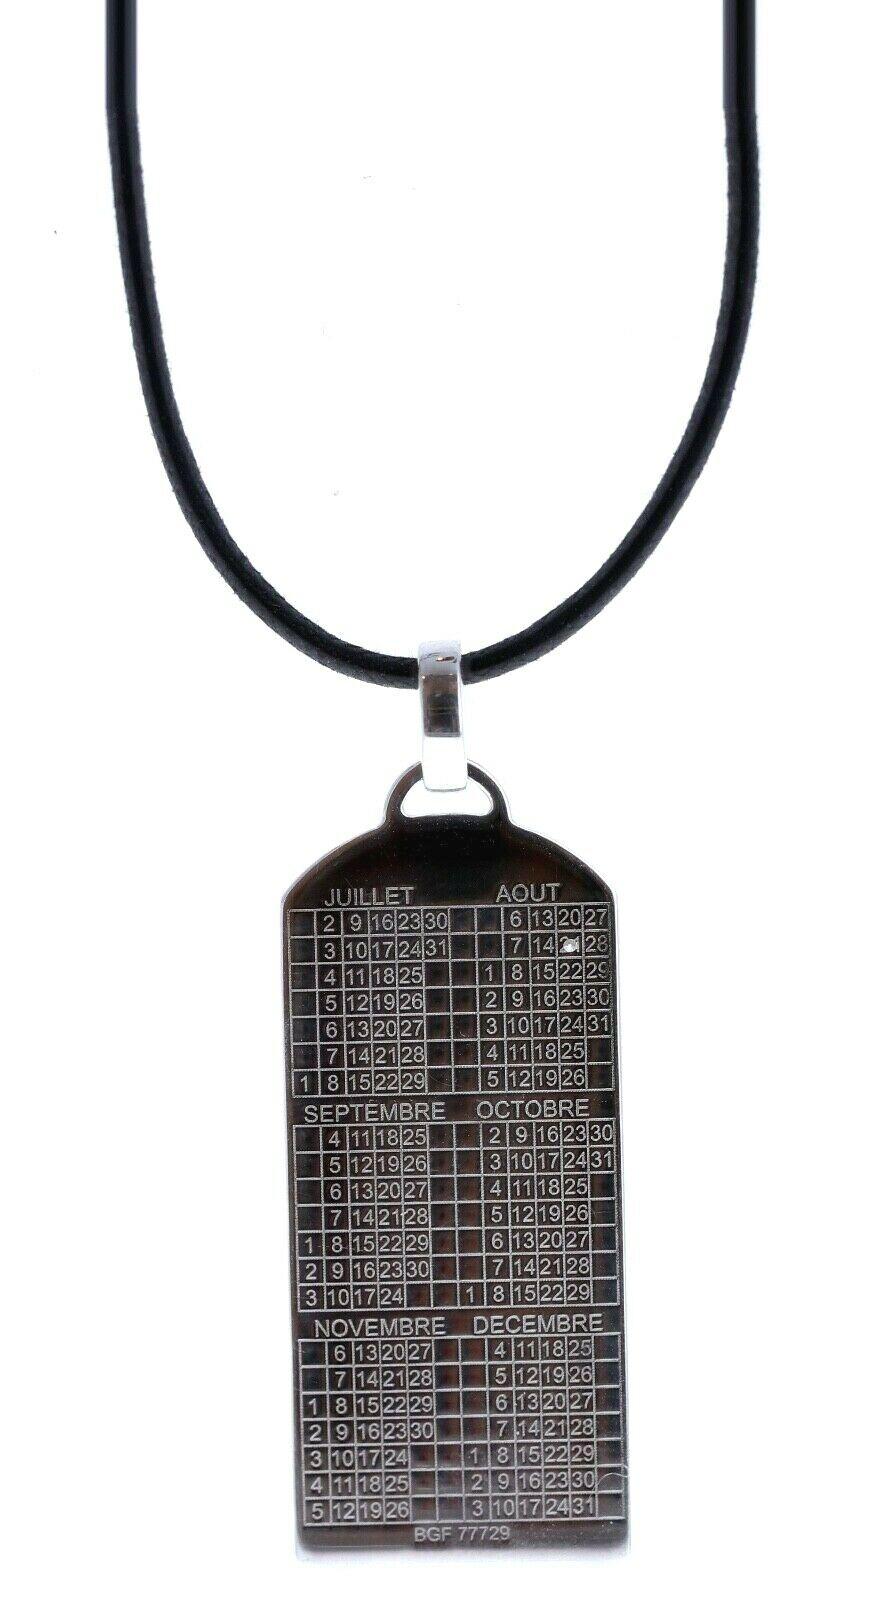 18k White Gold & Diamond Calendar Dog Tag Pendant Necklace 10.6g


For sale is a Fred 18k white gold calendar dog tag.
The pendant is comprised of 1 round brilliant cut diamond.
The pendant has a single diamond on the 9th of January. 
The pendant is